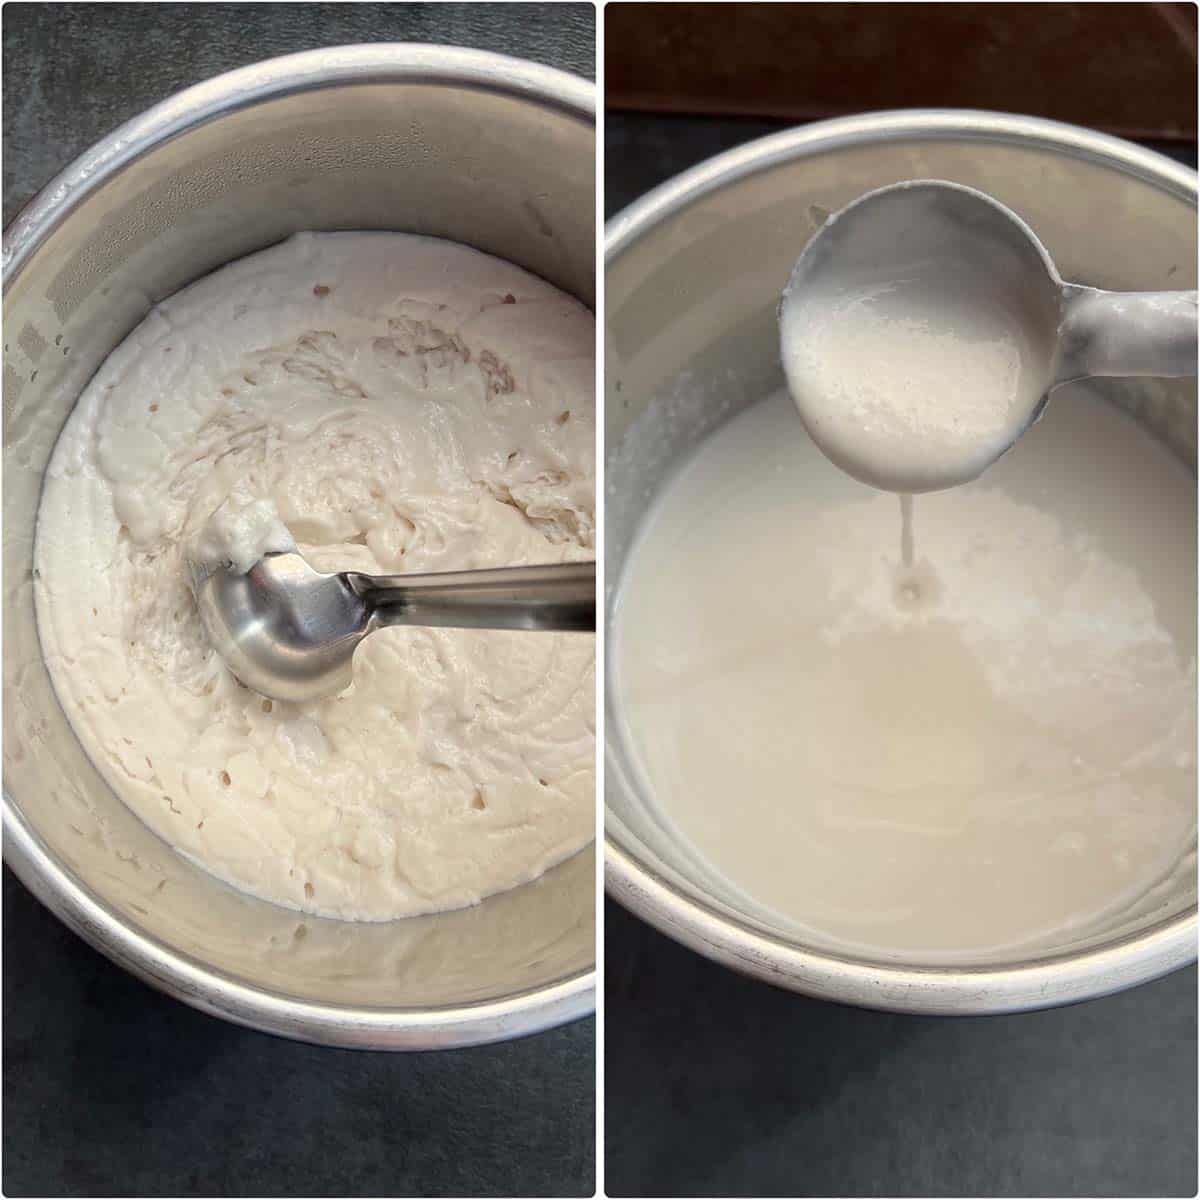 2 panel photo showing the risen batter and mixed with water.